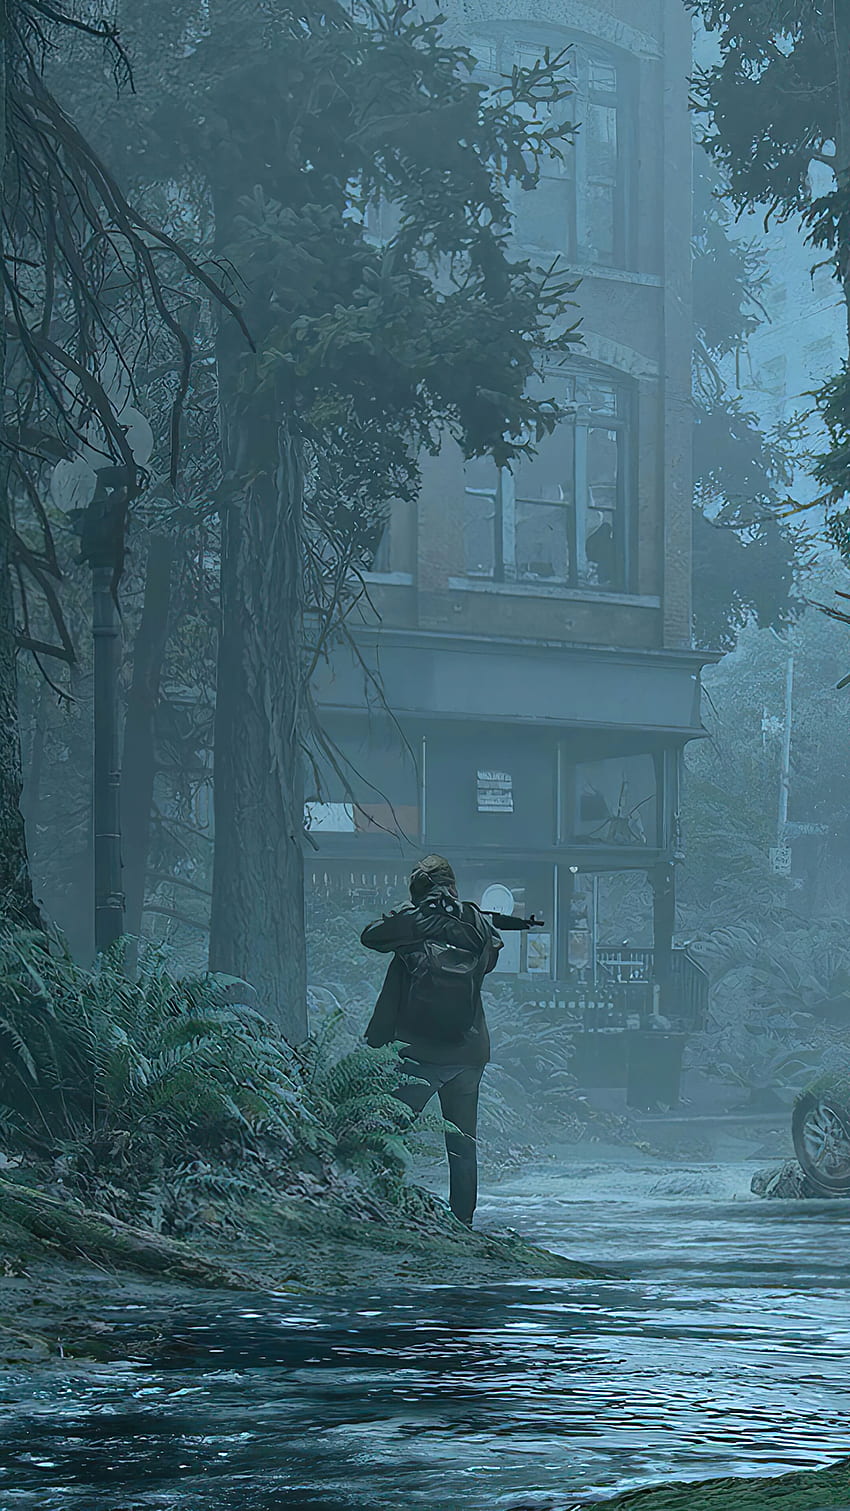 Check out these stunning The Last of Us wallpapers created by Yoji Shinkawa